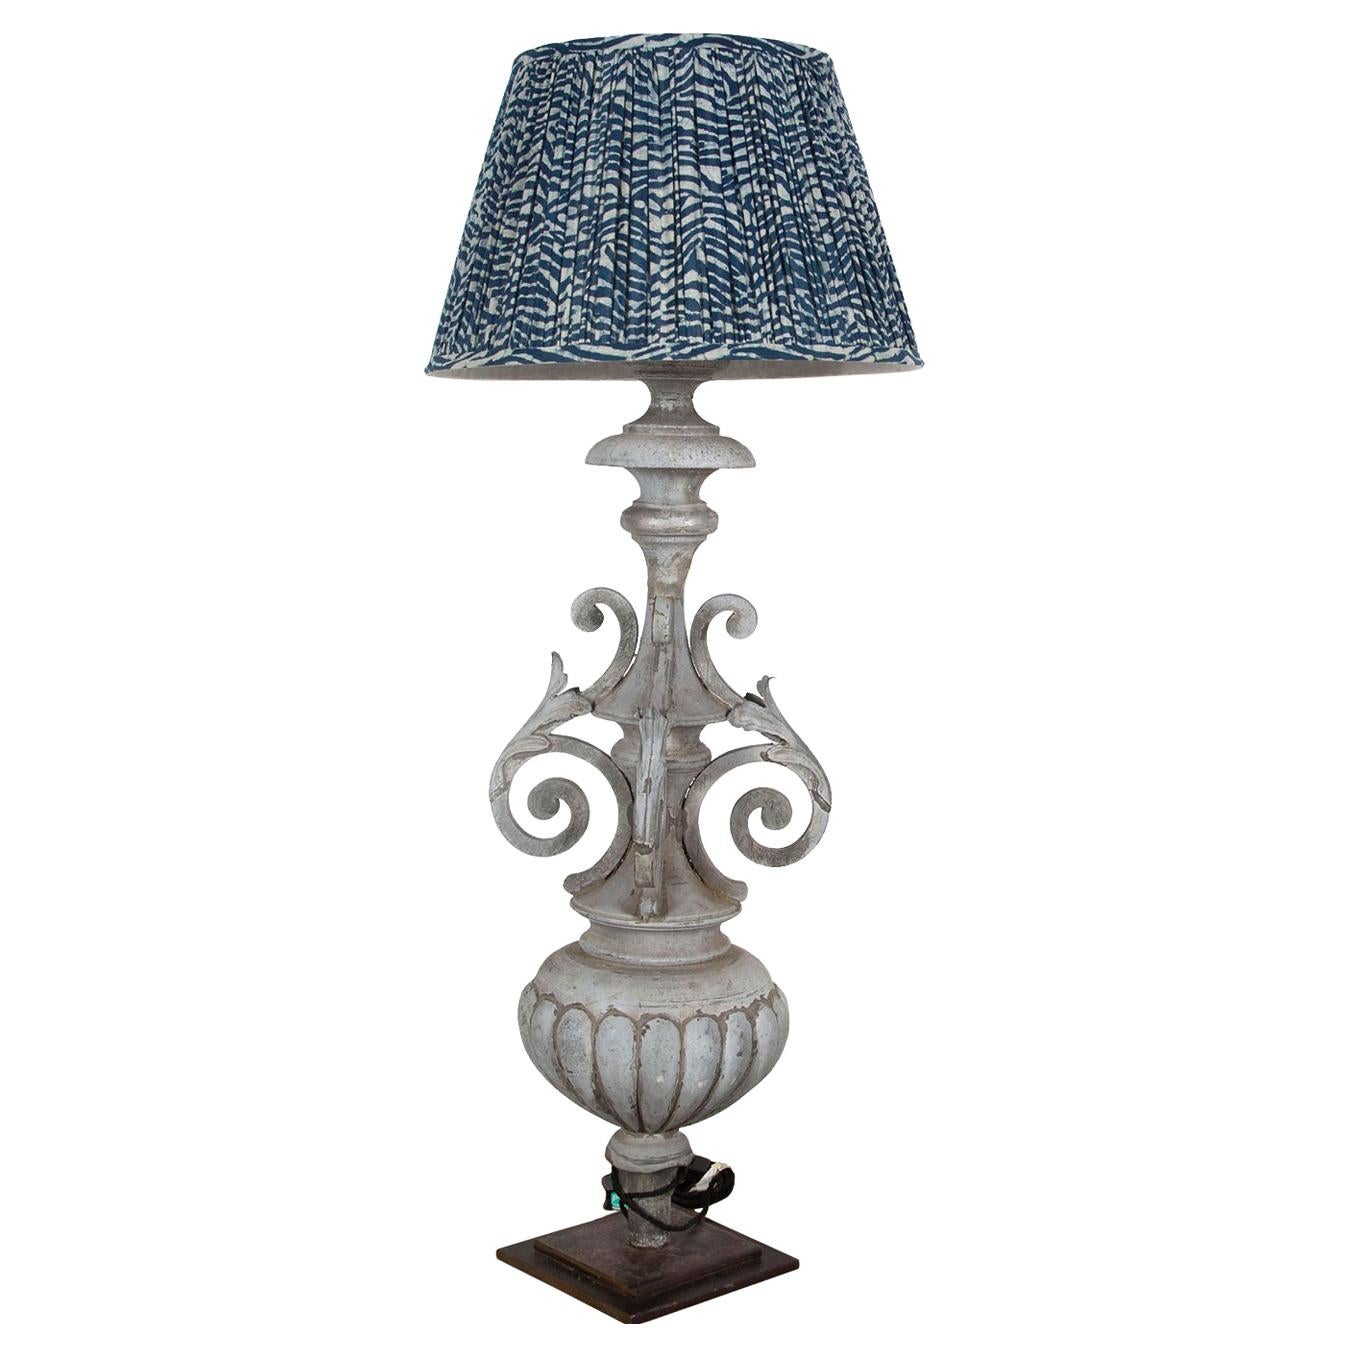 19th Century Architectural Fragment Adapted into a Zinc Lamp For Sale